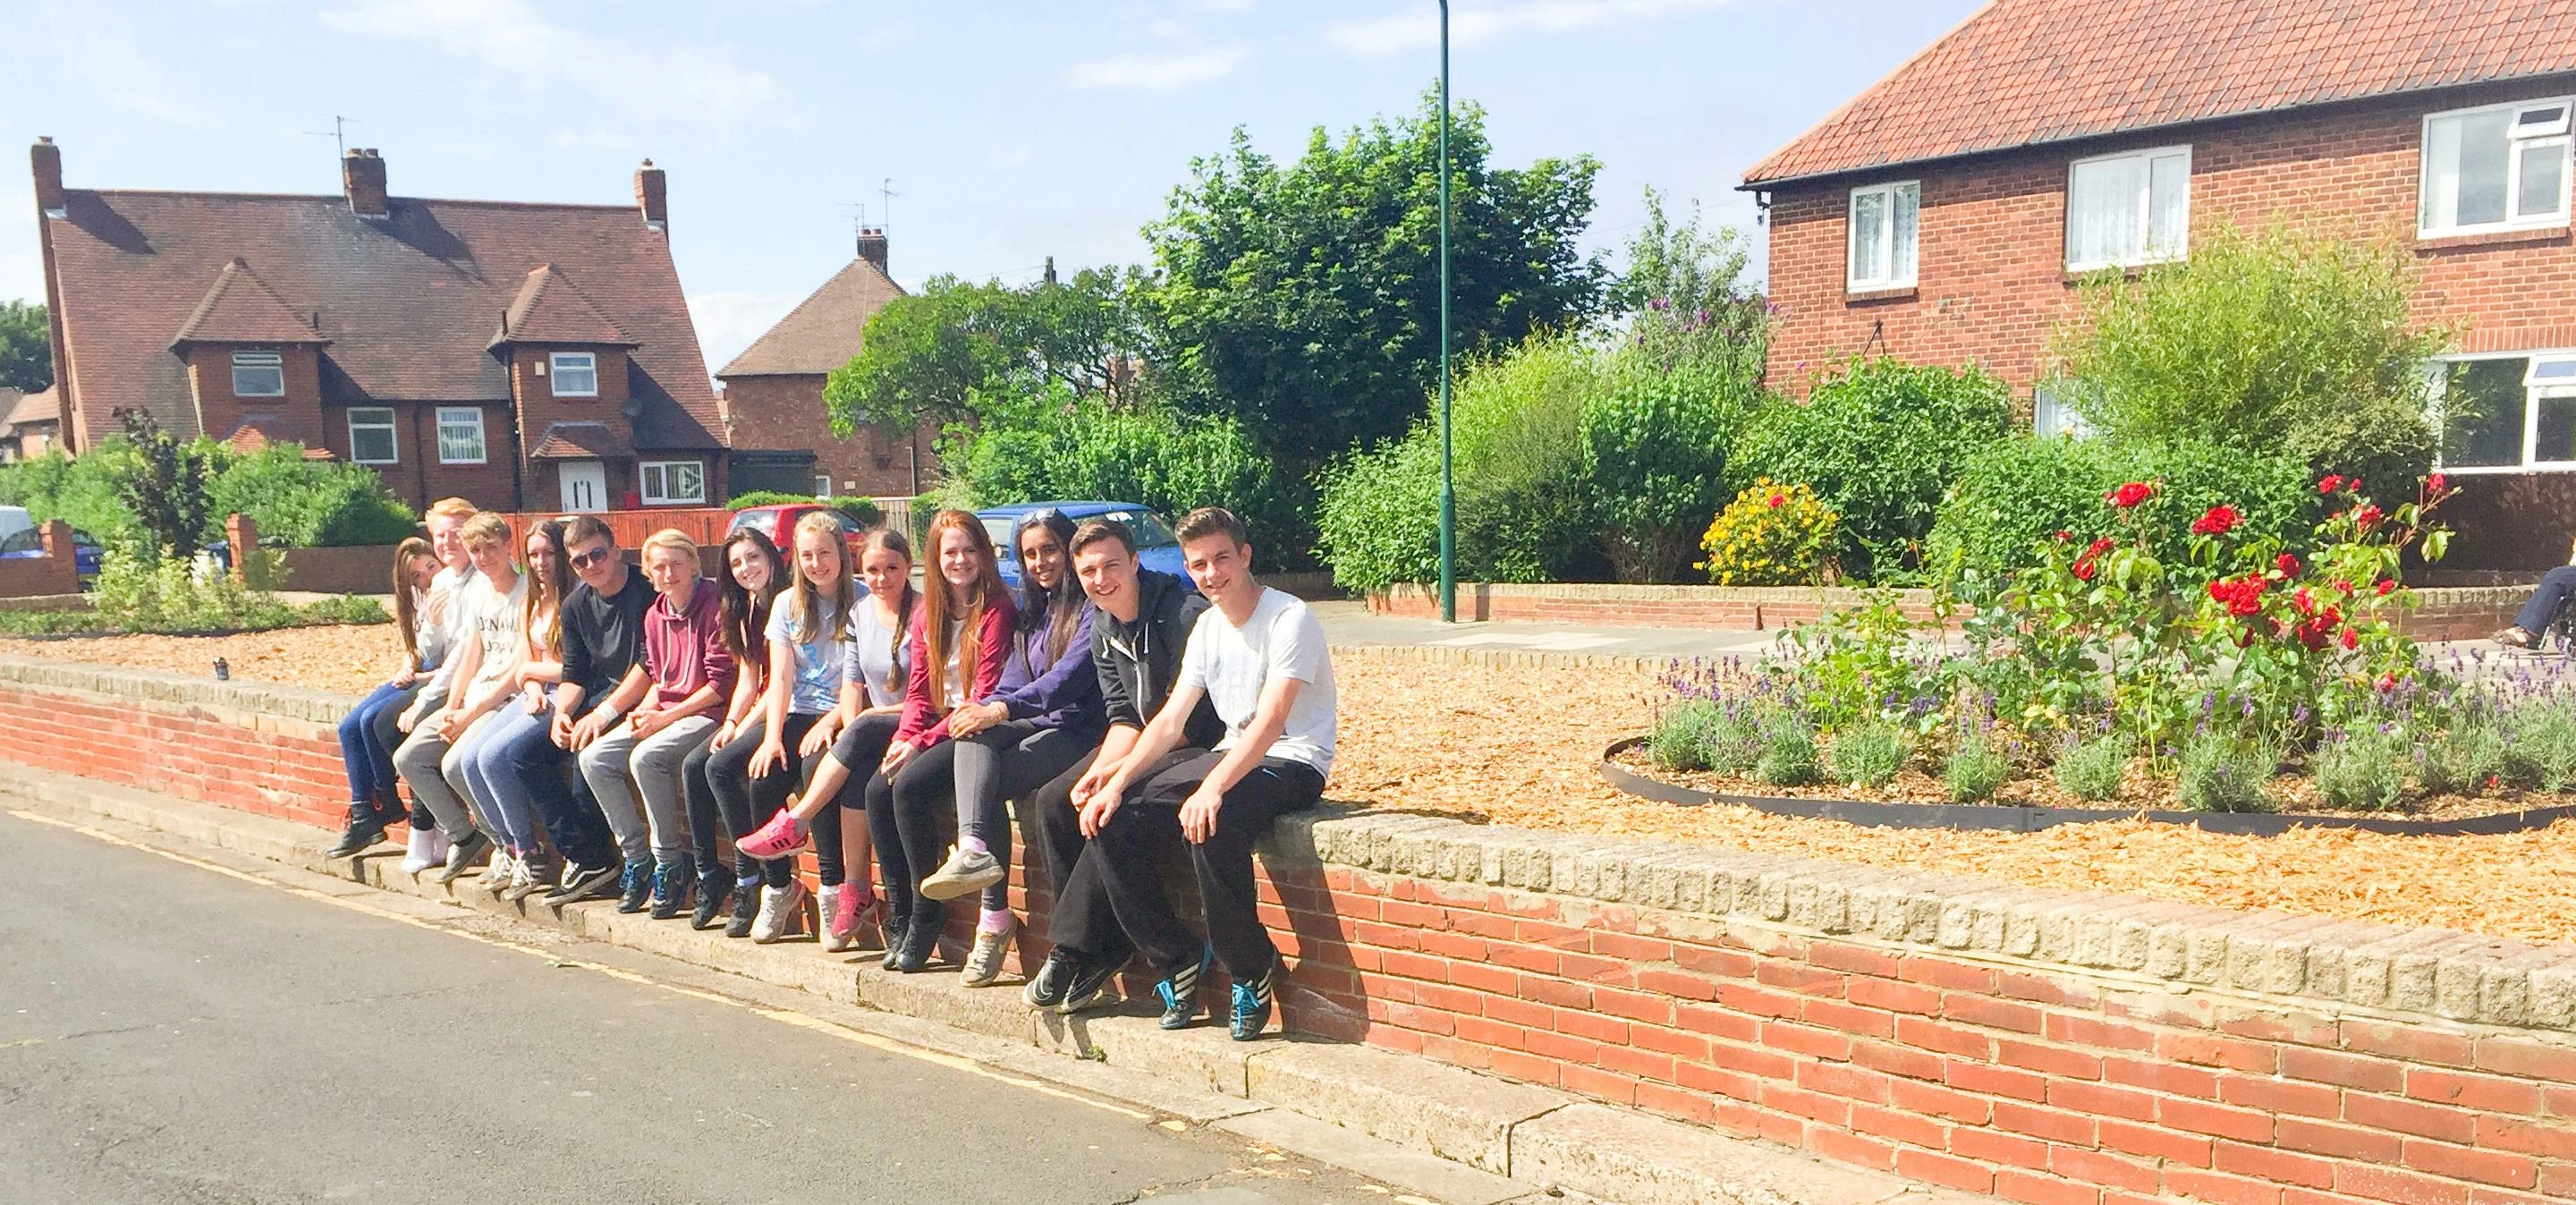 Teenagers in Redcar refurbished a community garden through their work with National Citizen Service 